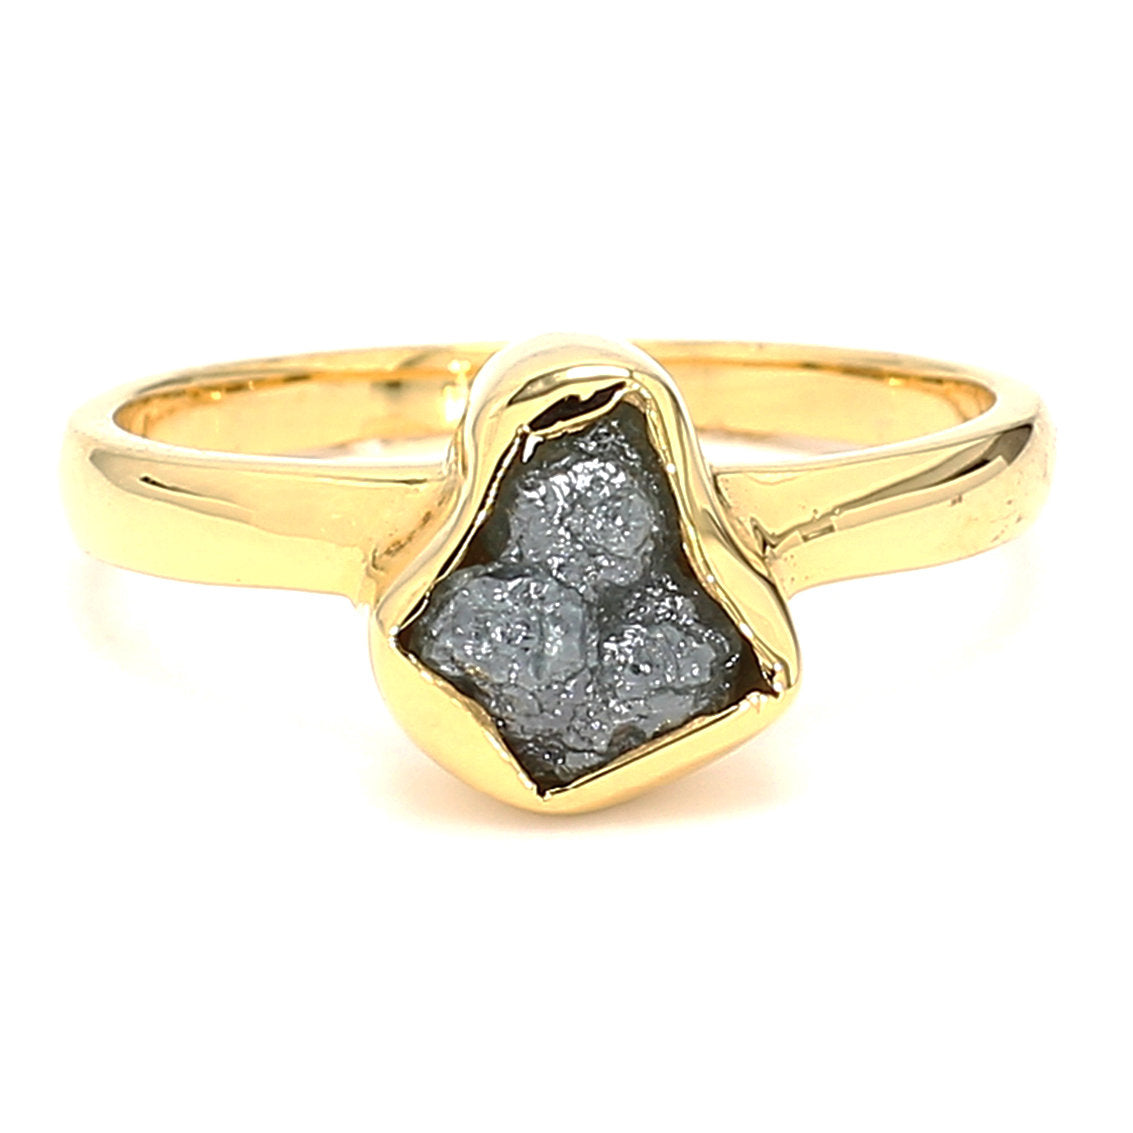 Natural Blue Rough Diamond 14K Solid Yellow Gold Ring Engagement Wedding Gift Ring KD512